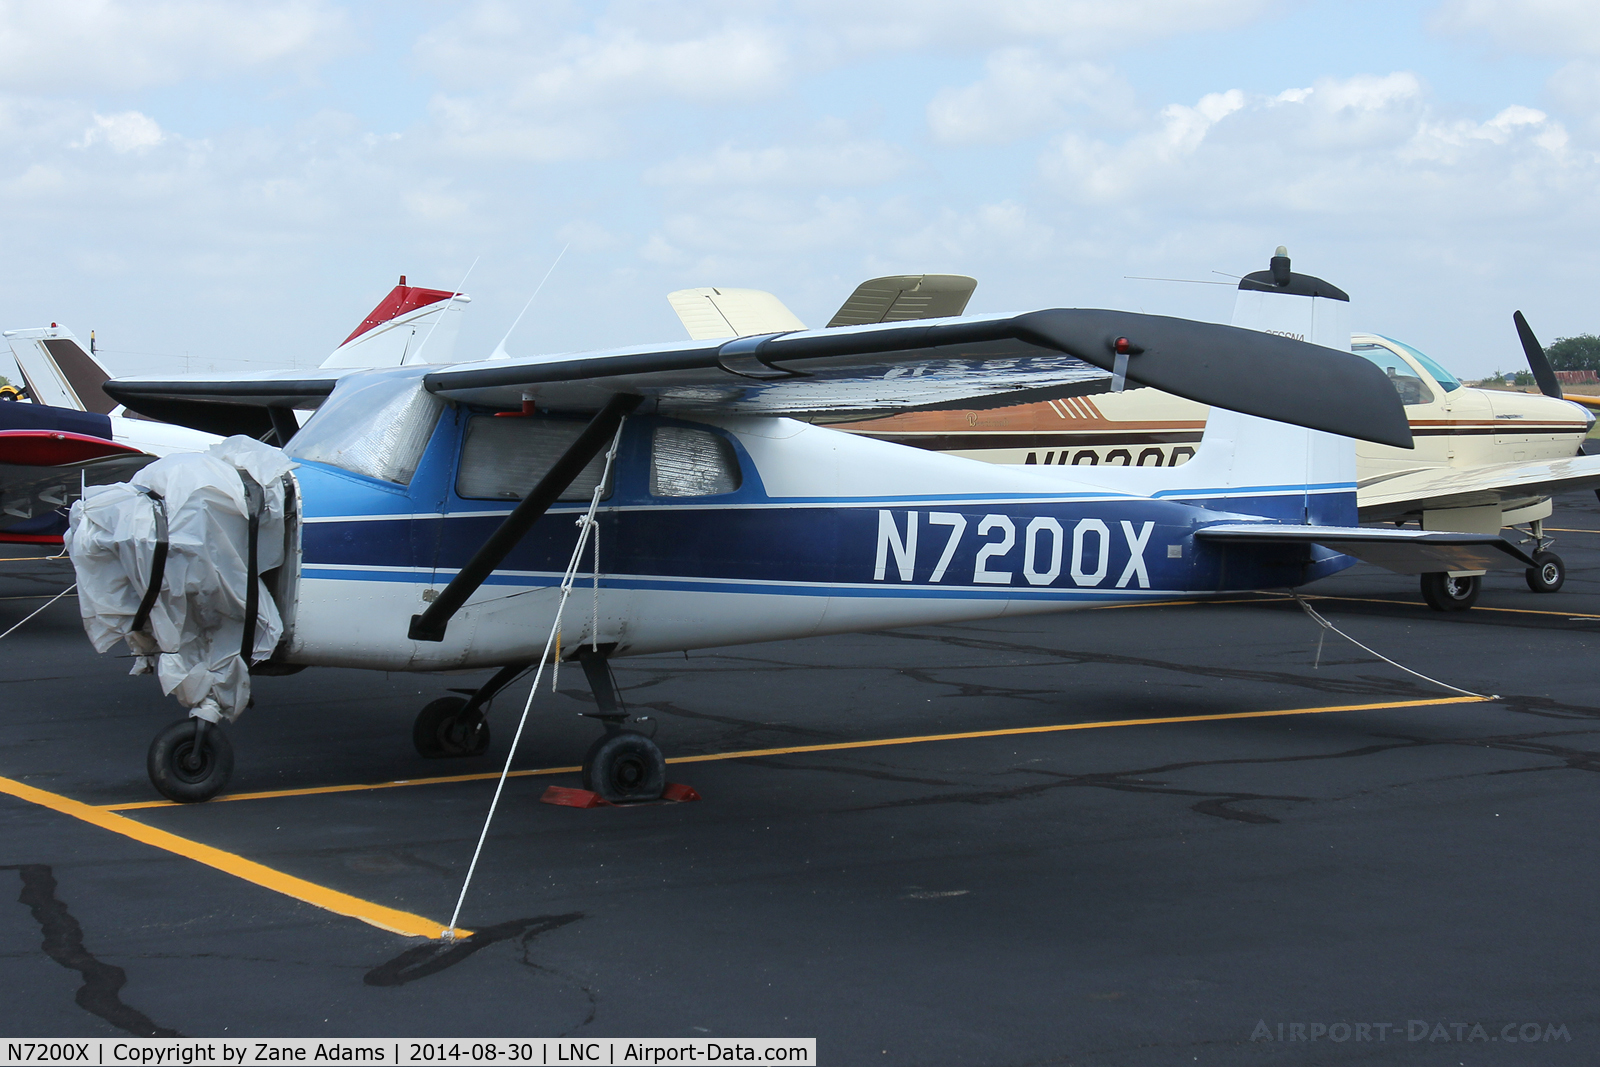 N7200X, 1961 Cessna 150A C/N 15059300, At the 2014 Warbirds on Parade